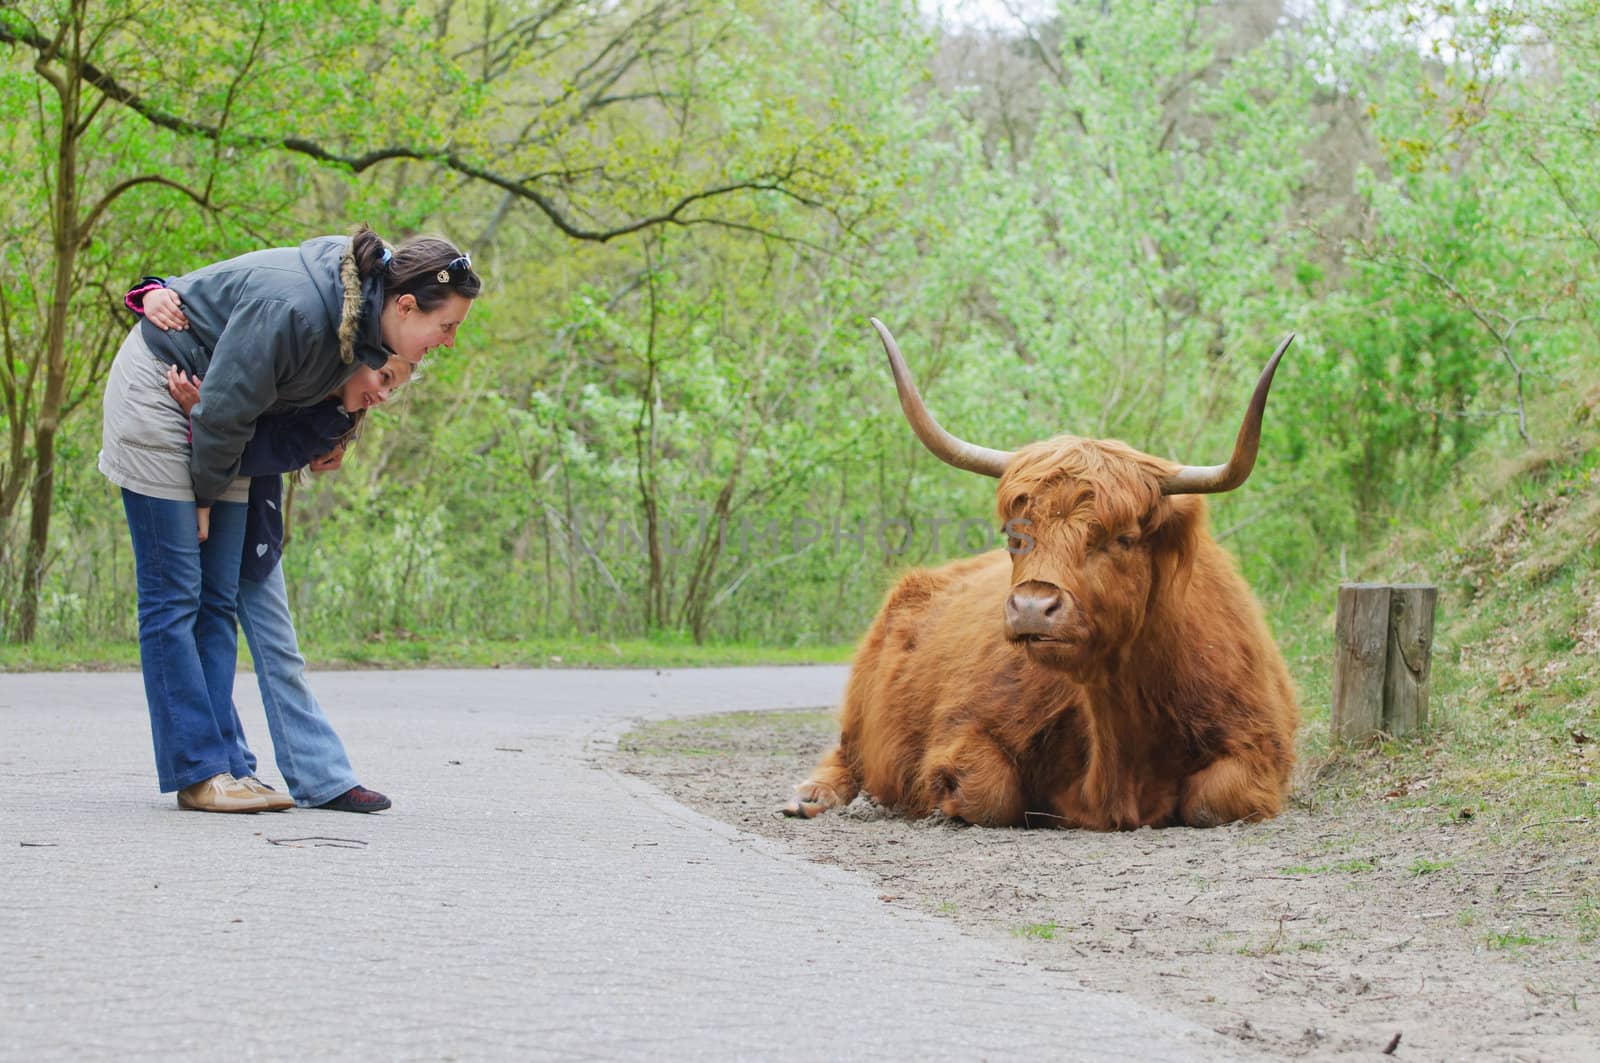 Mom and daughter for a walk in a national park in Holland watching Highland Bull